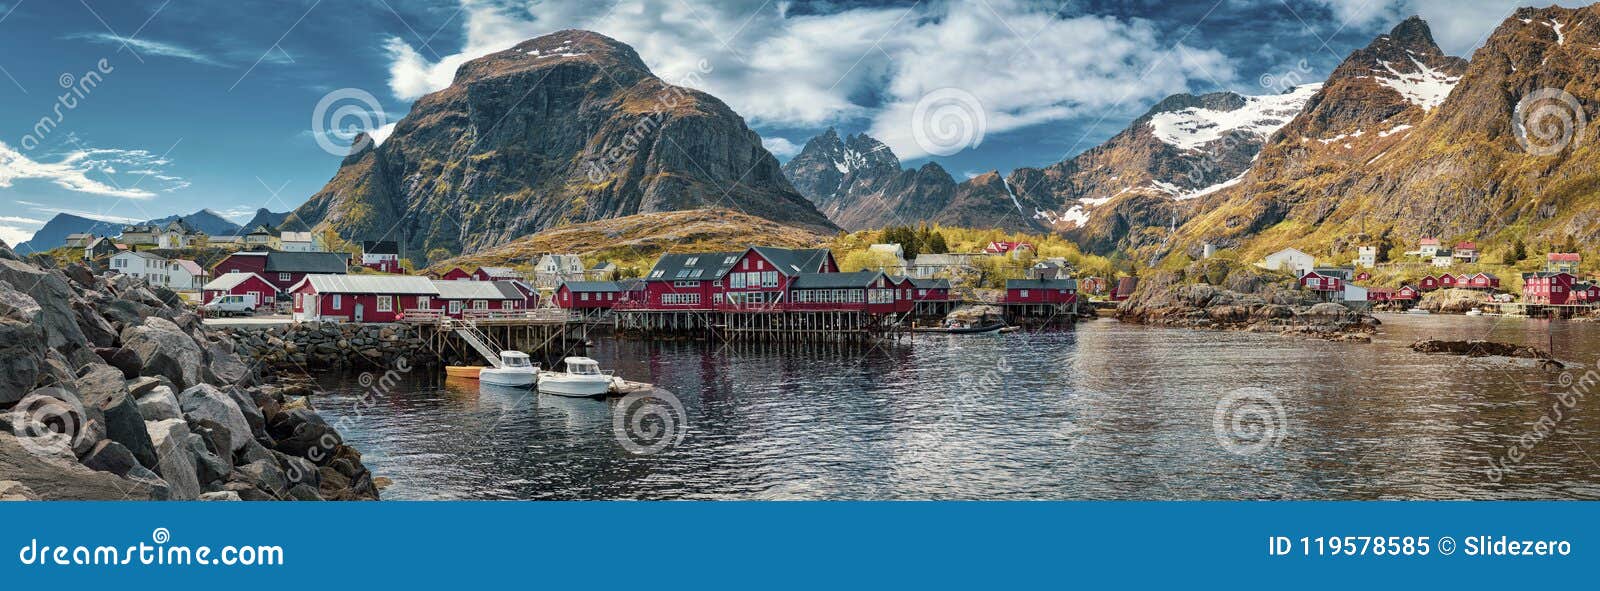 panoramic shot of a village, moskenes, on the lofoten in norther